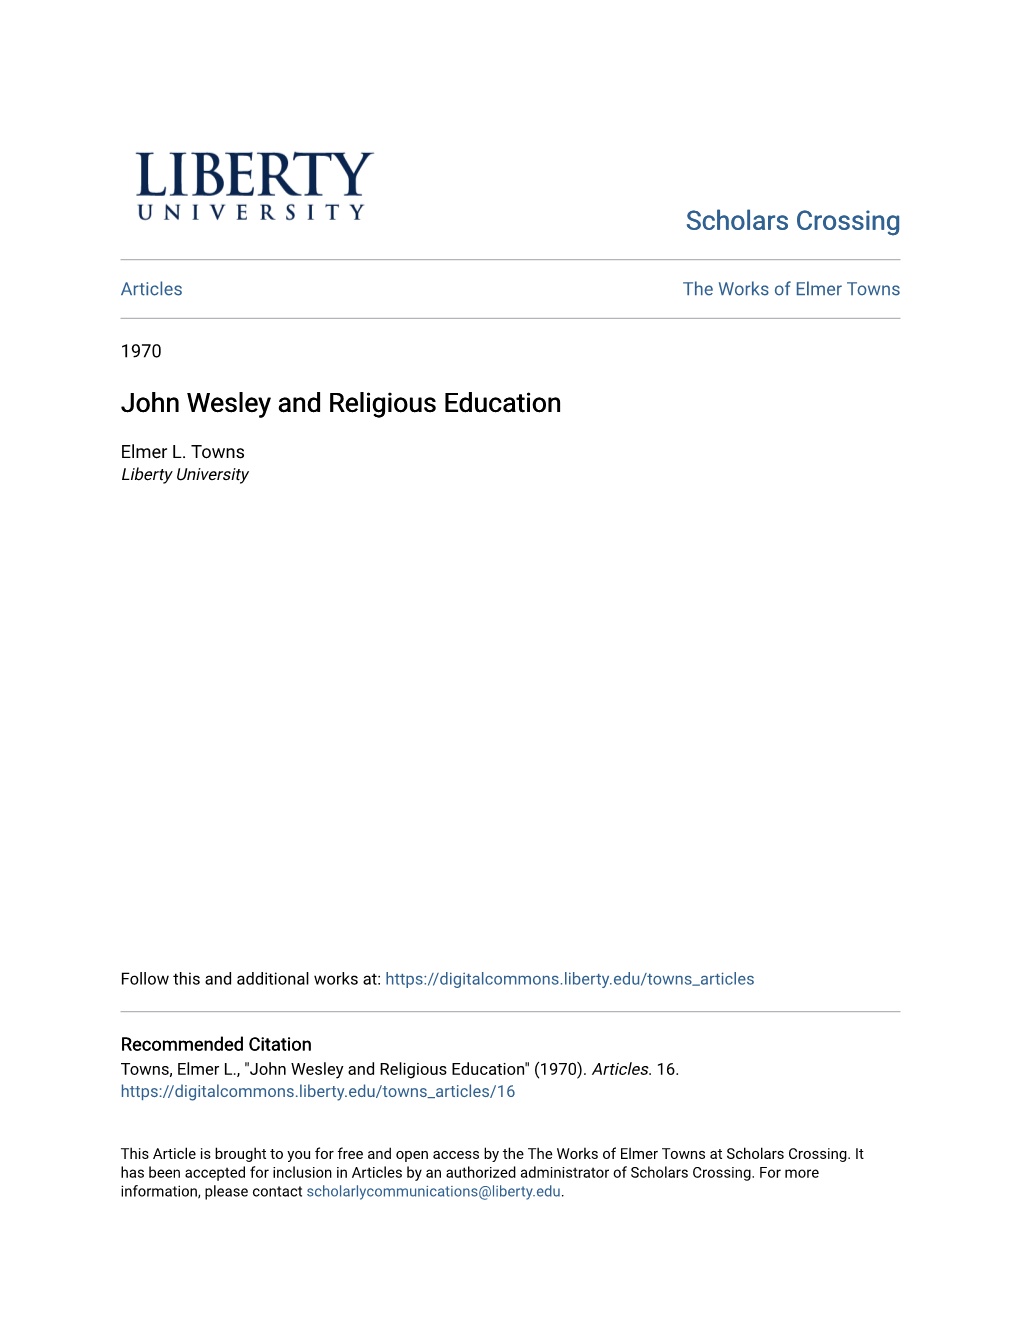 John Wesley and Religious Education